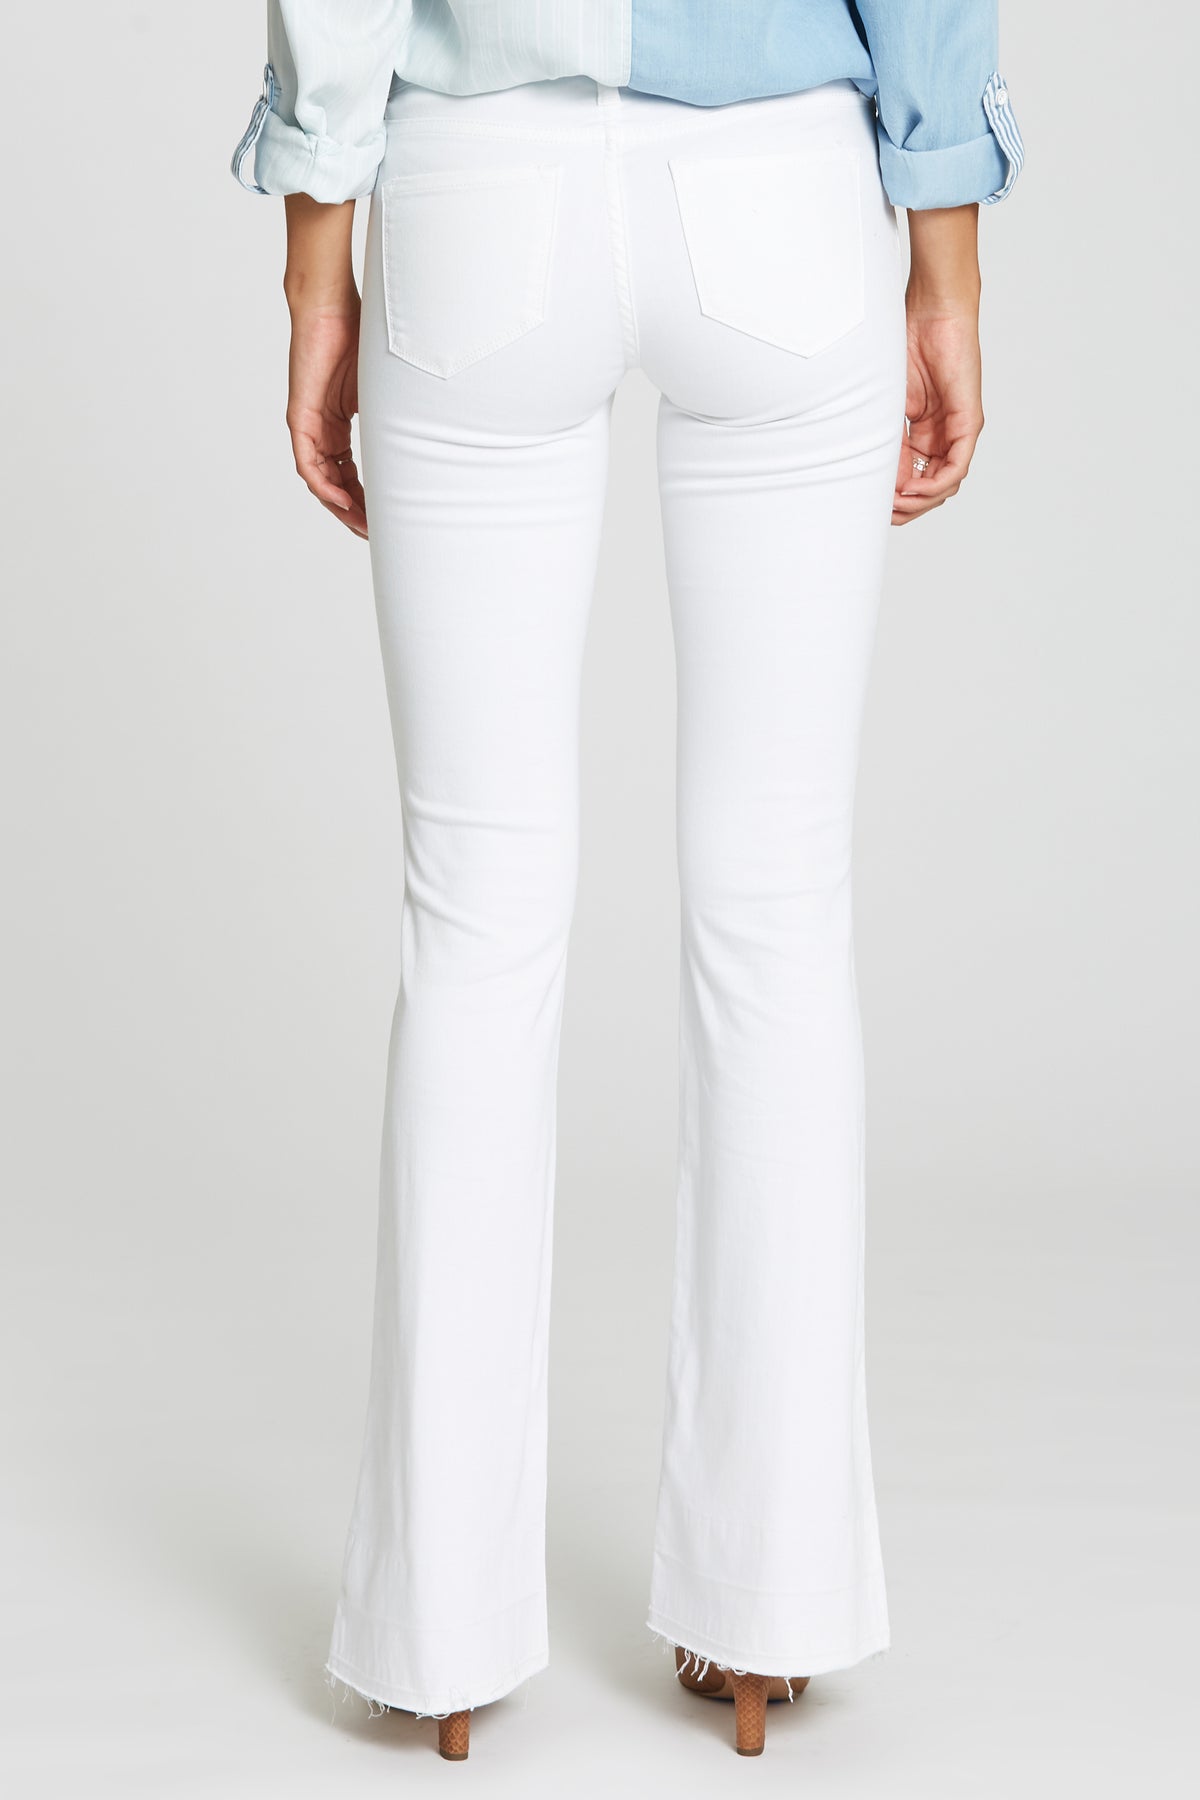 Rosie White Flares - the-attic-boutique-and-gift